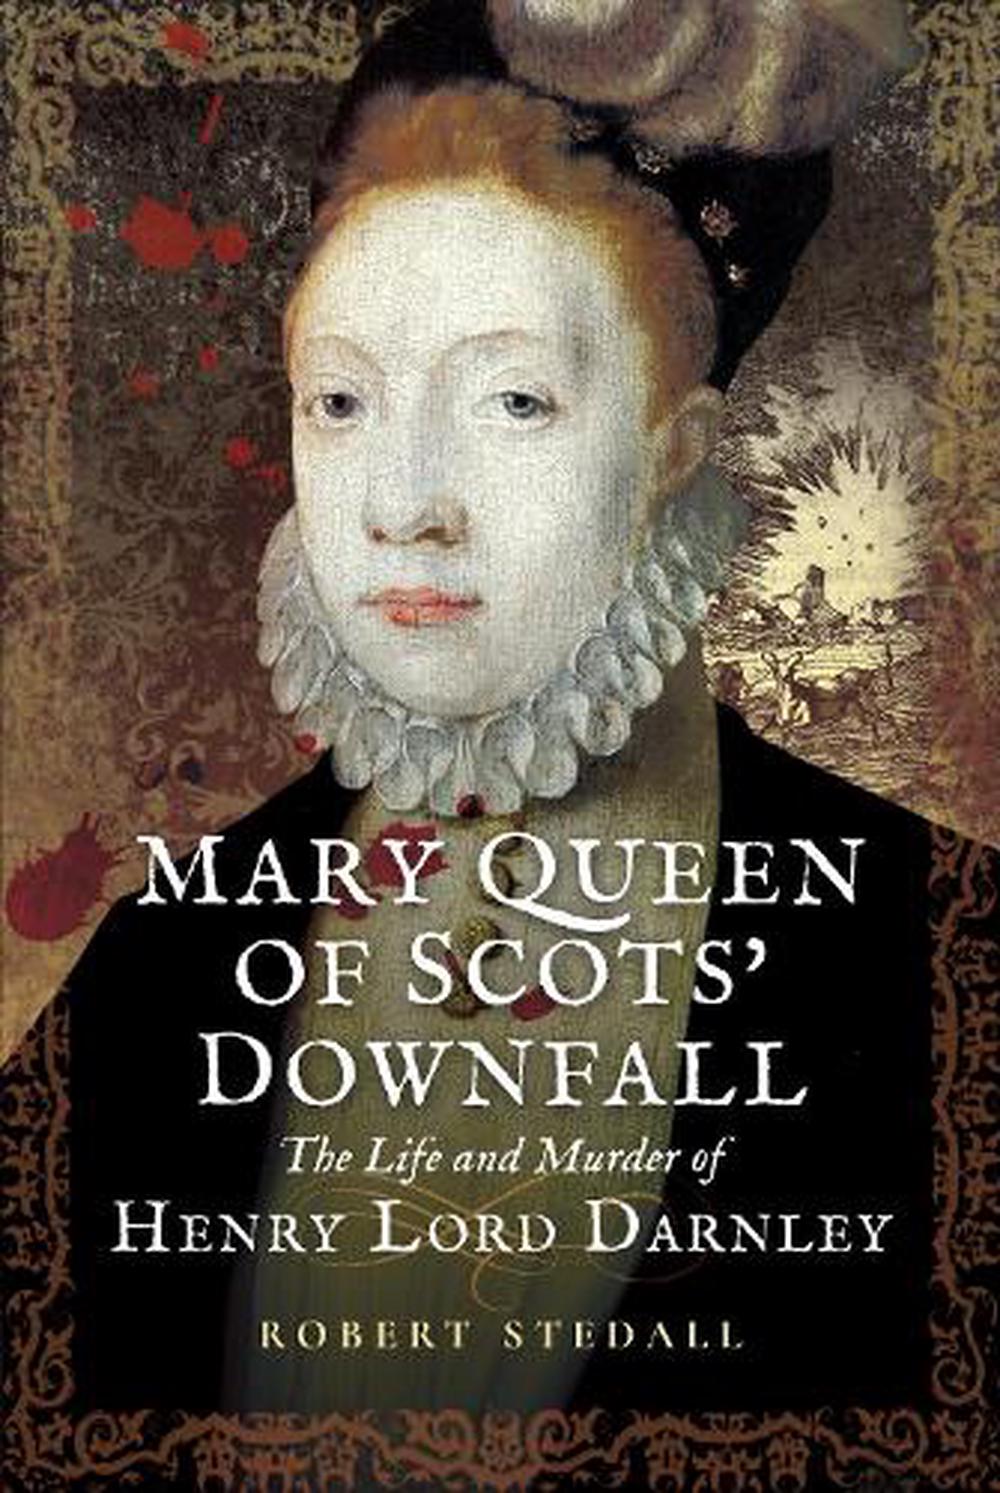 Mary Queen of Scots and the Murder of Lord Darnley by Alison Weir